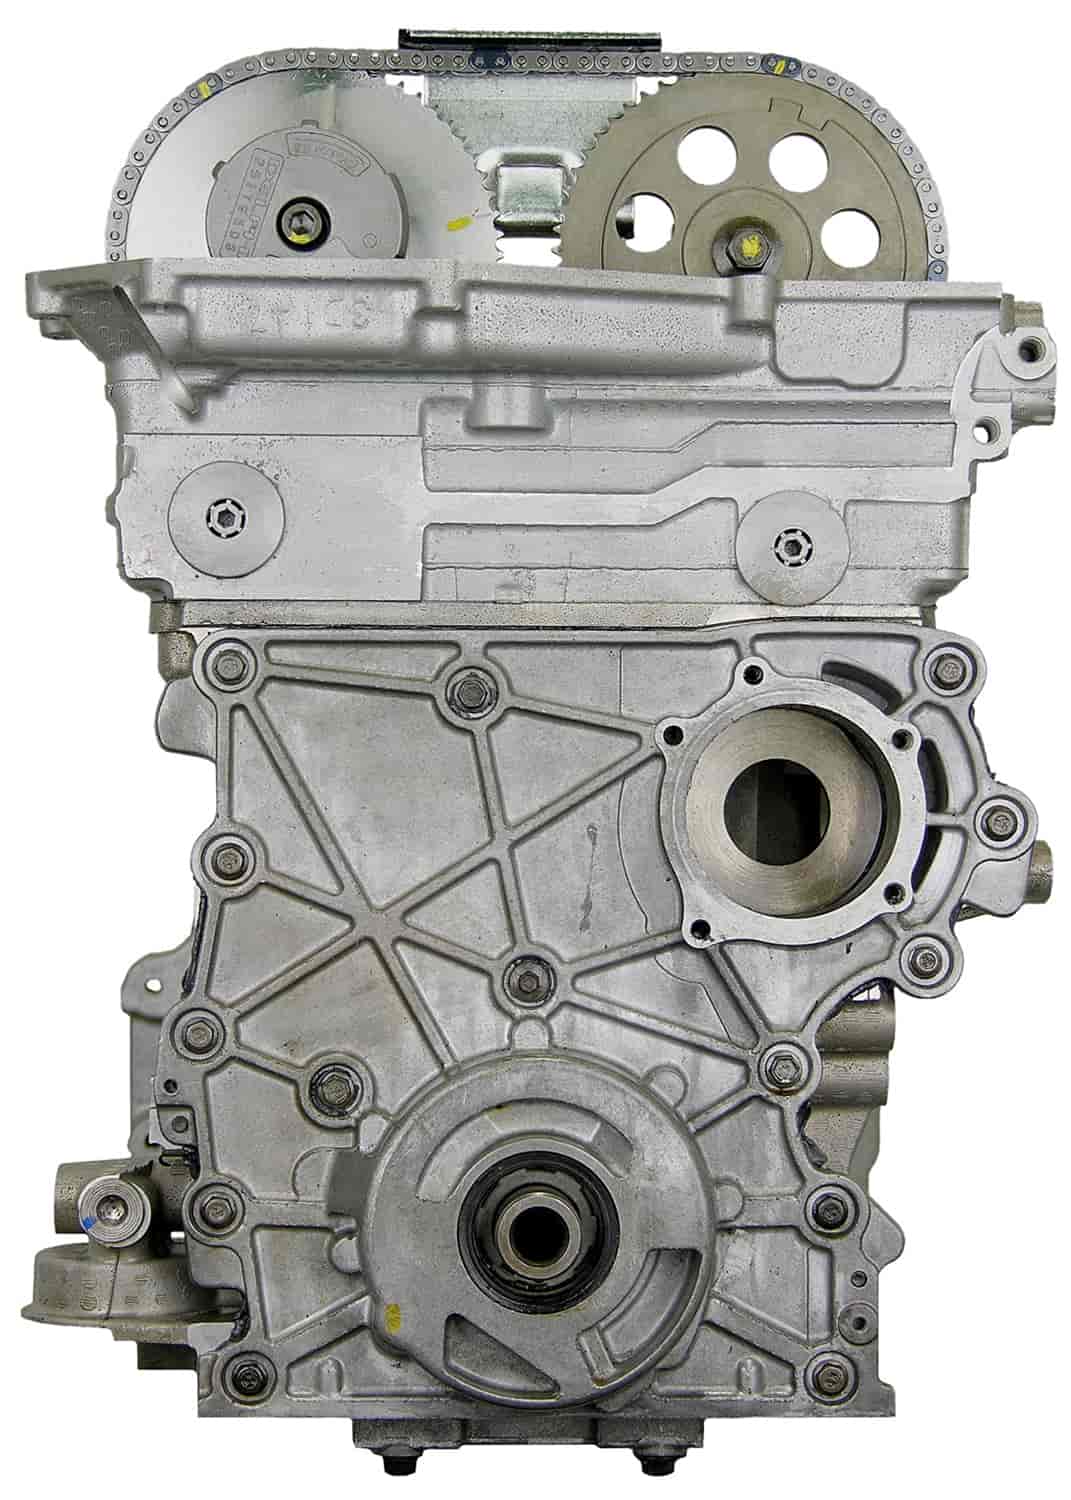 Remanufactured Crate Engine for 2002-2004